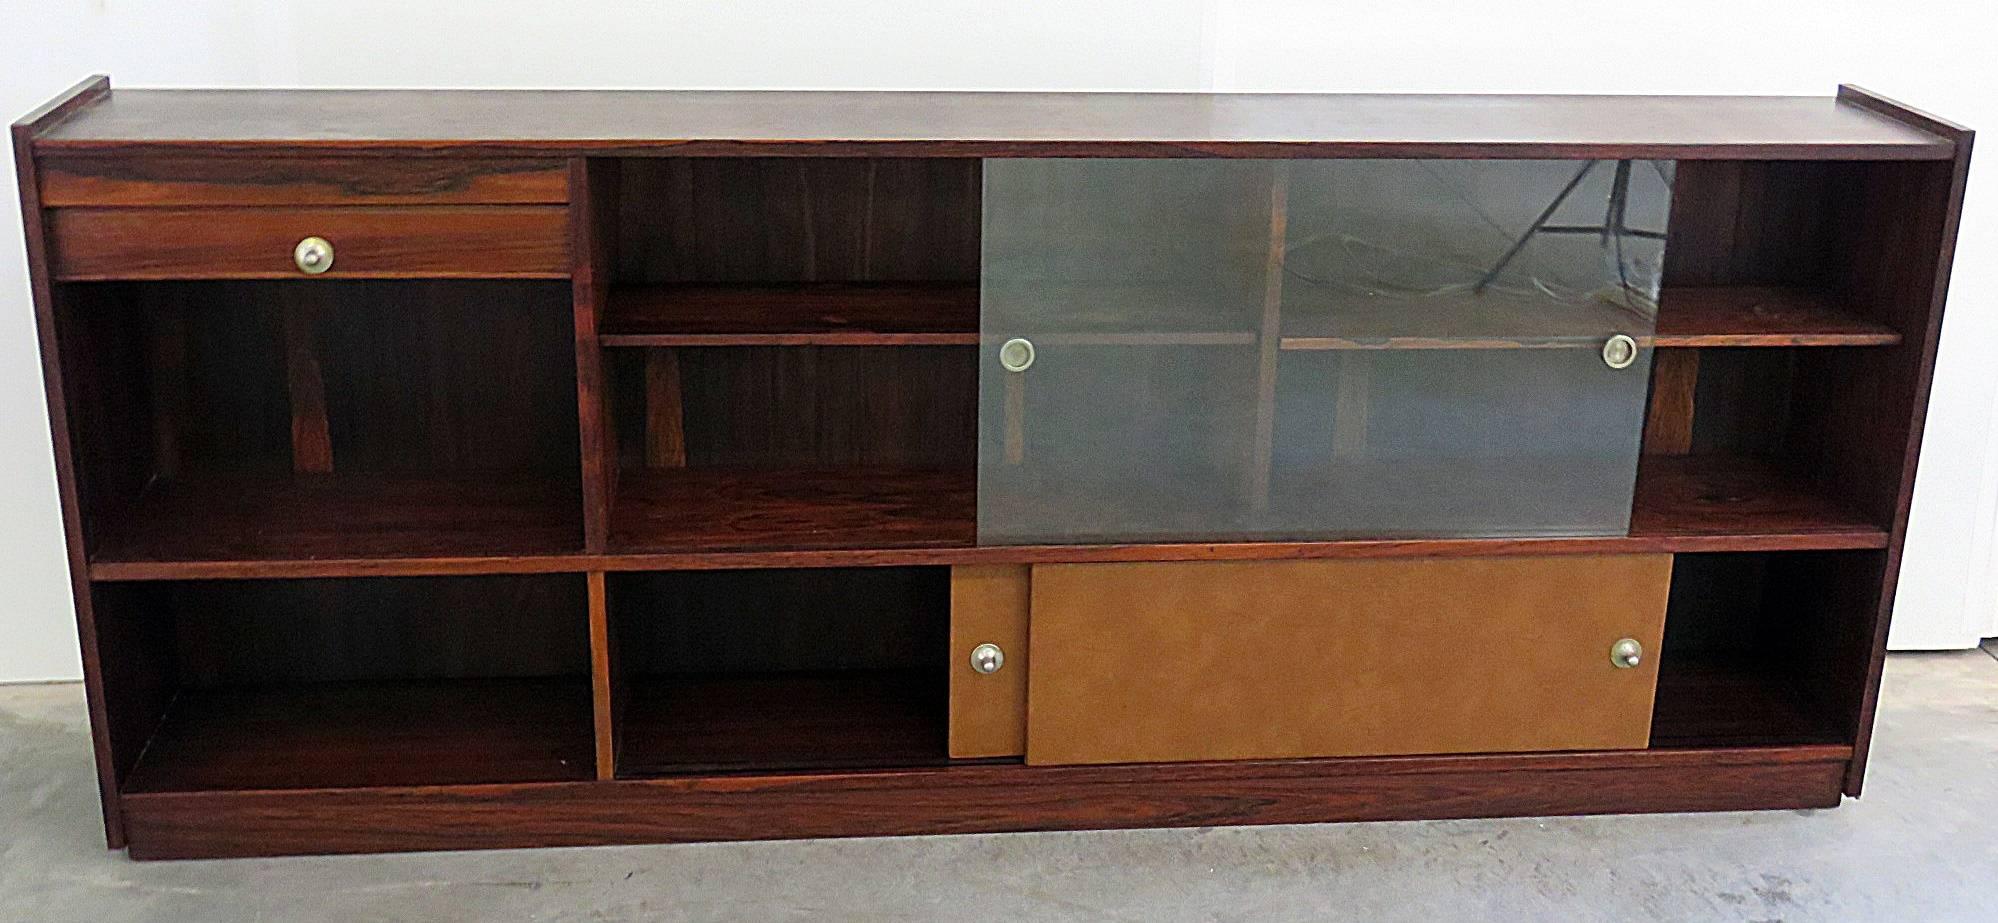 Frattini rosewood TV console or bookcase with tambour roll up door, five doors and two shelves.